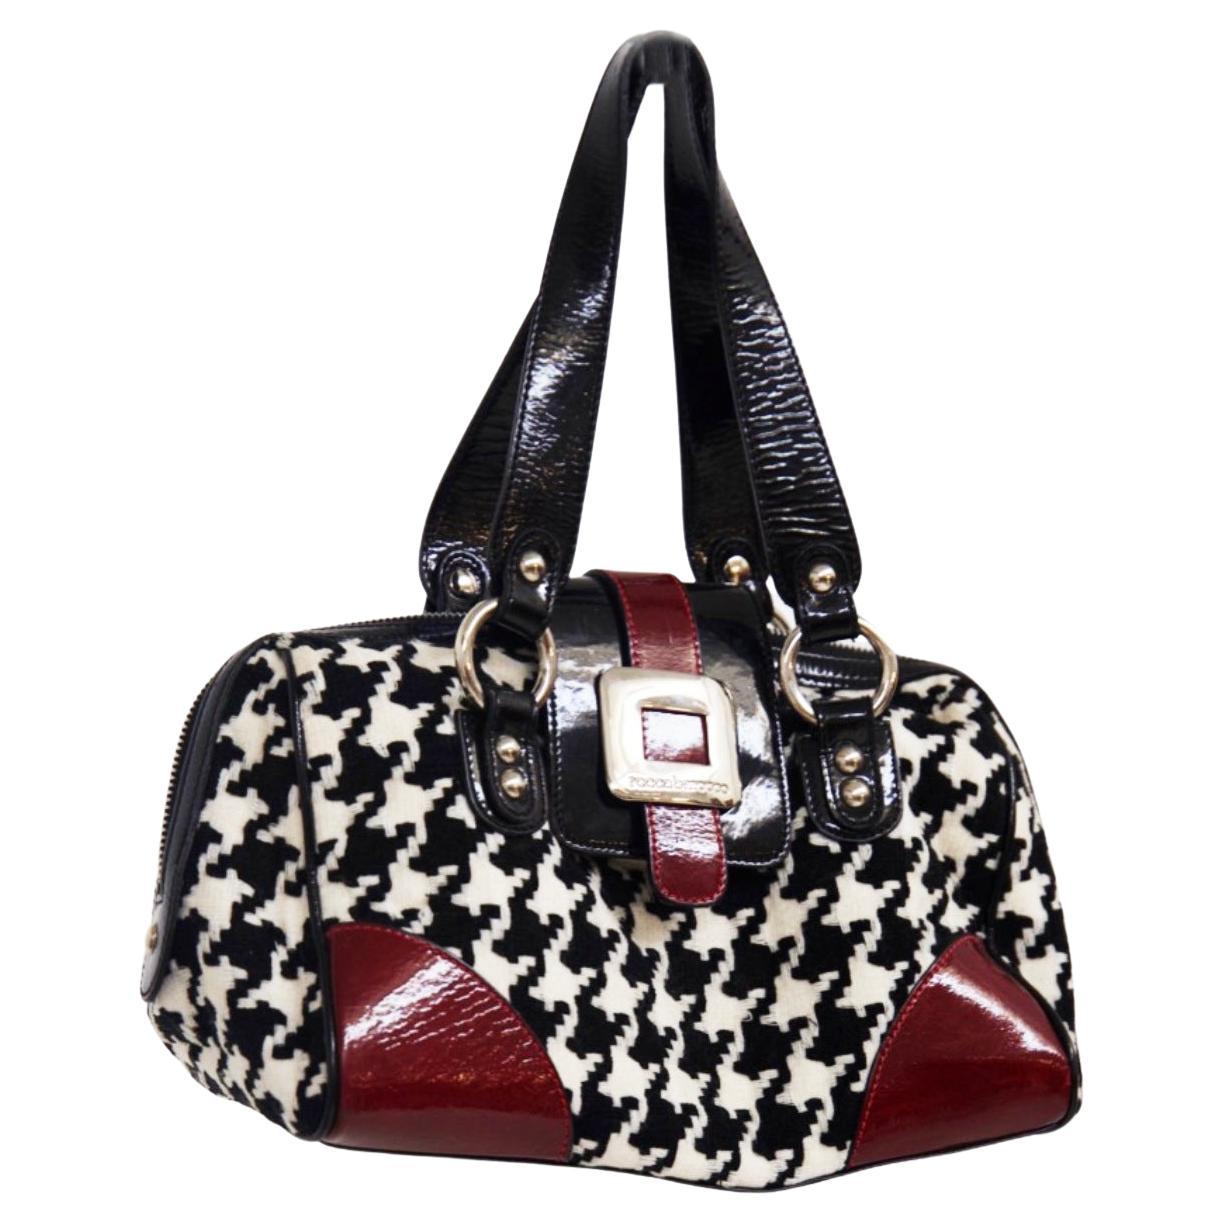 Rocco Barocco Vintage Handbag in Patent and Houndstooth For Sale